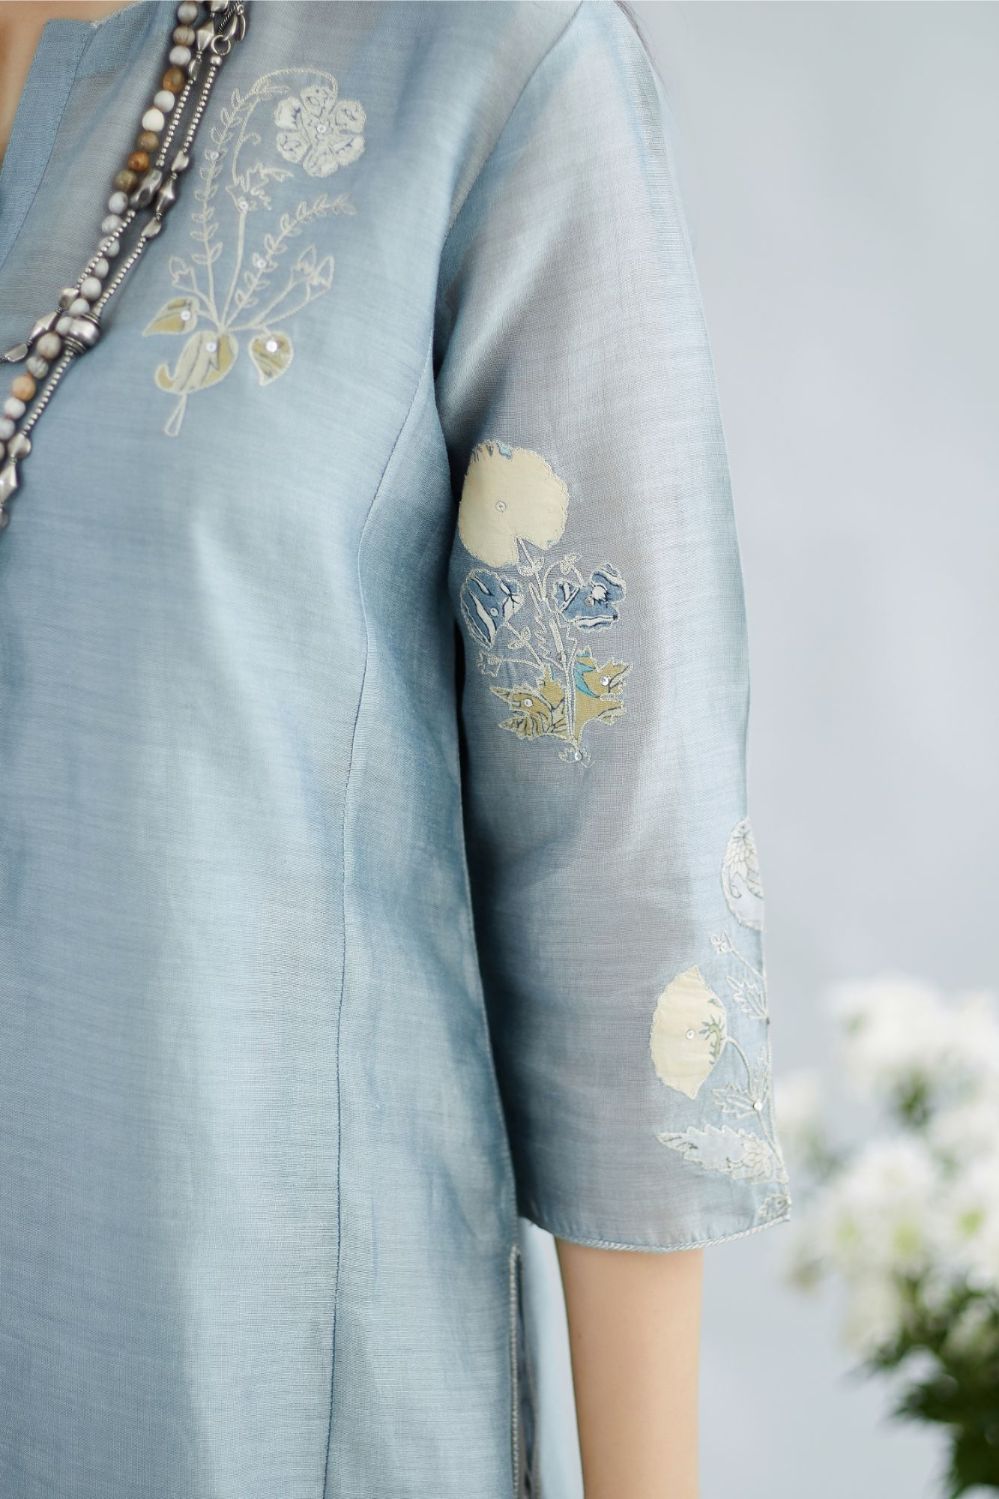 Pigeon blue silk Chanderi straight kurta set with all-over floral assorted print applique, highlighted with sequin and silver zari embroidery.